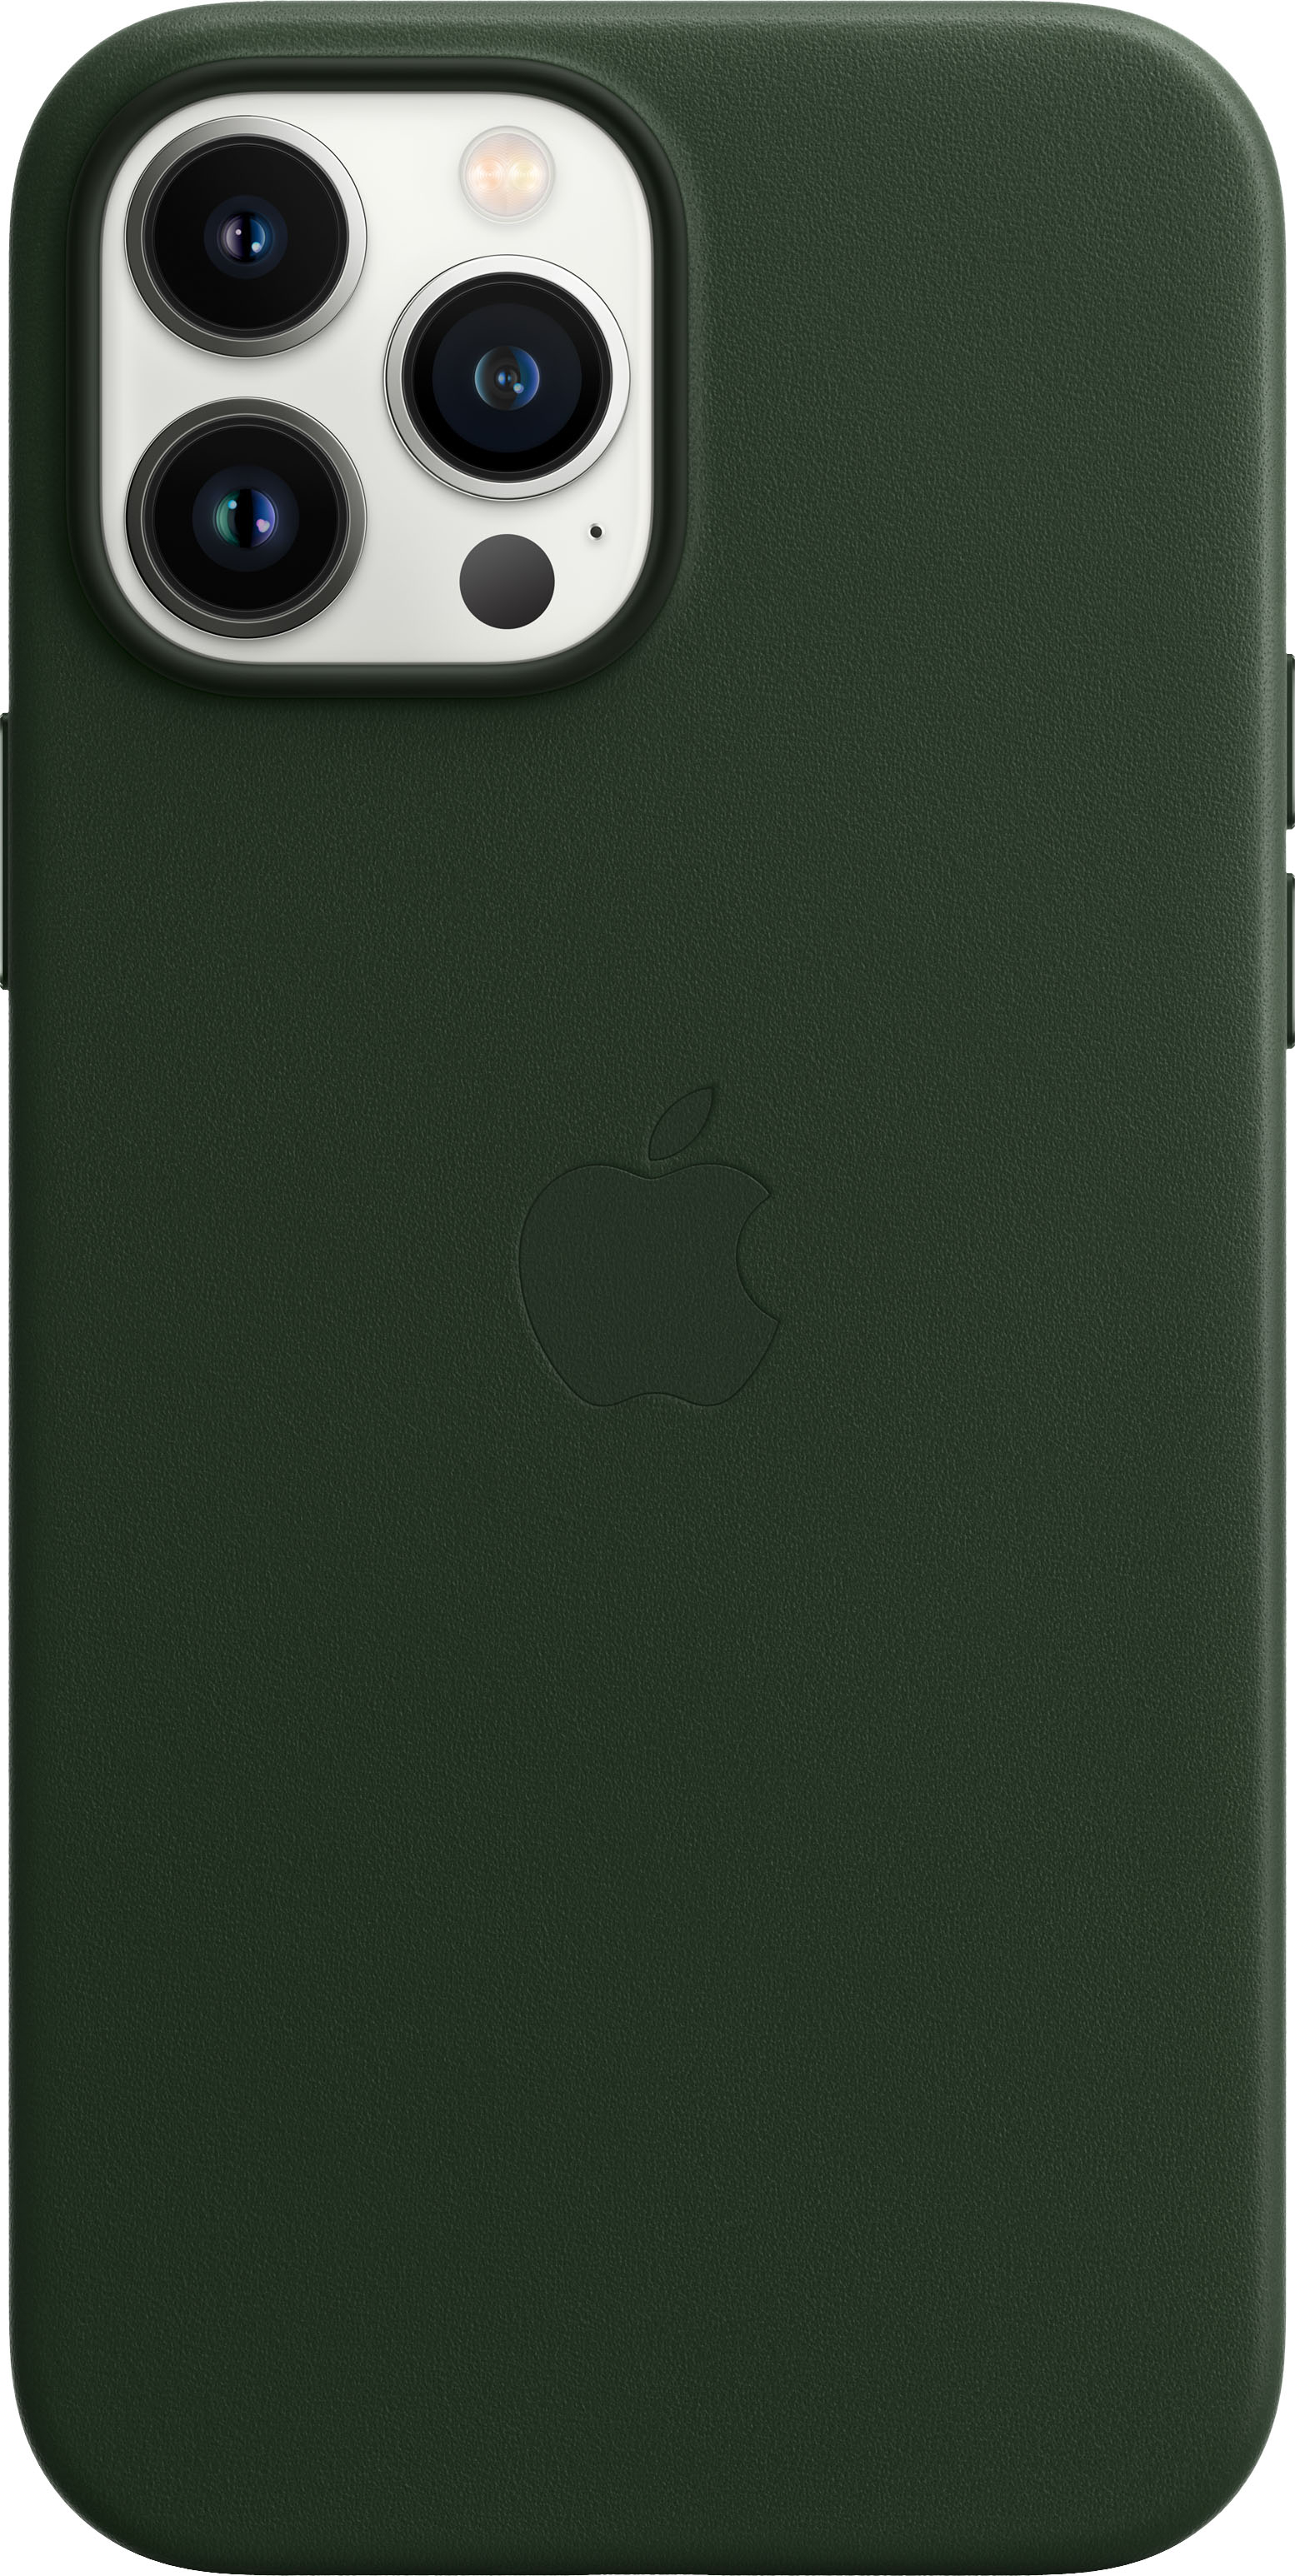 Pro iphone max green 13 Apple introduces